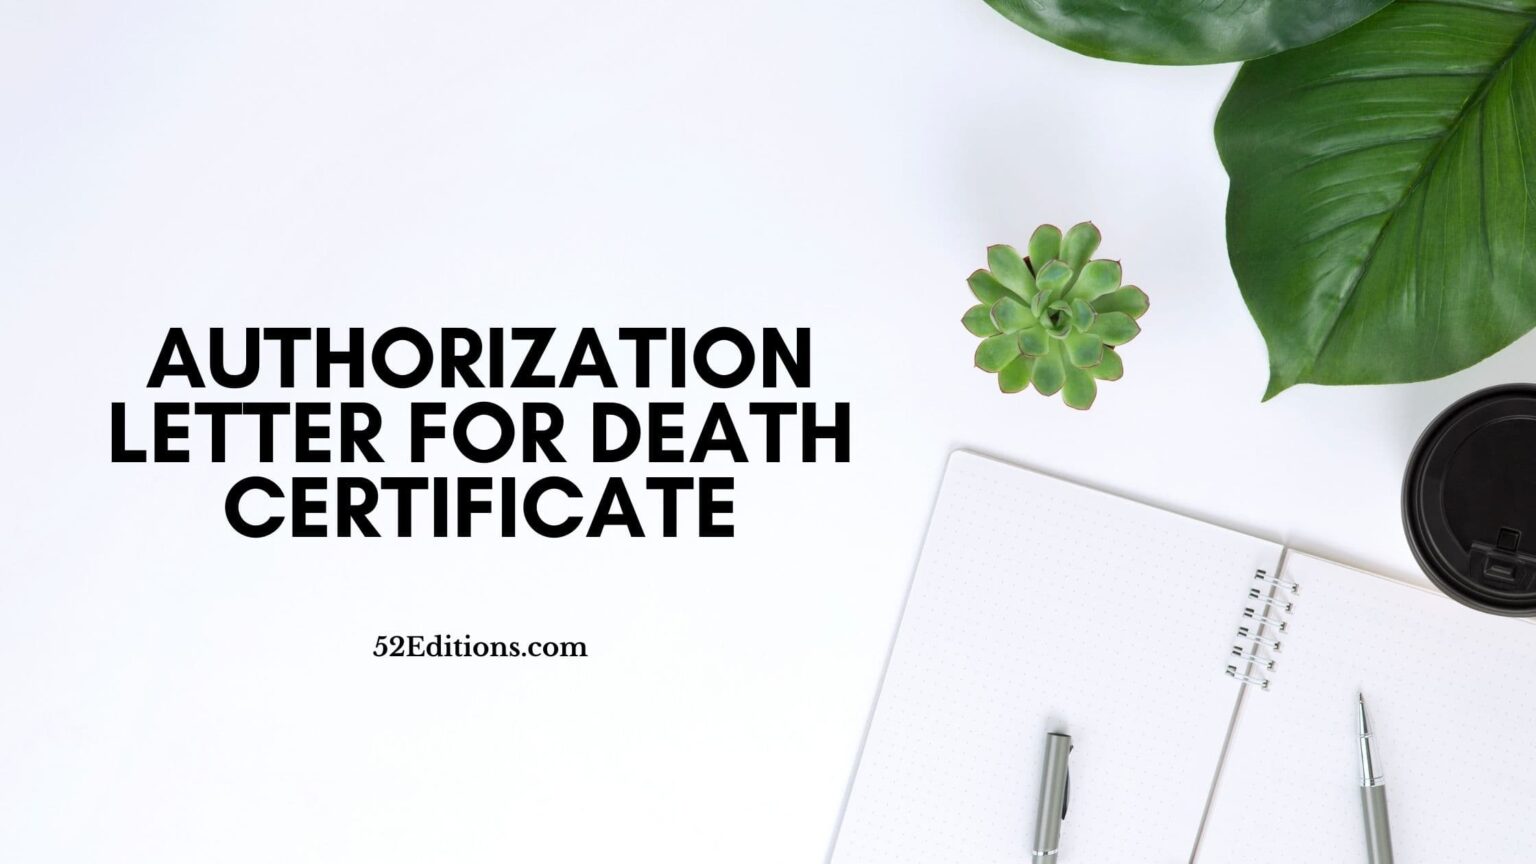 Authorization Letter For Death Certificate // Get FREE Letter Templates